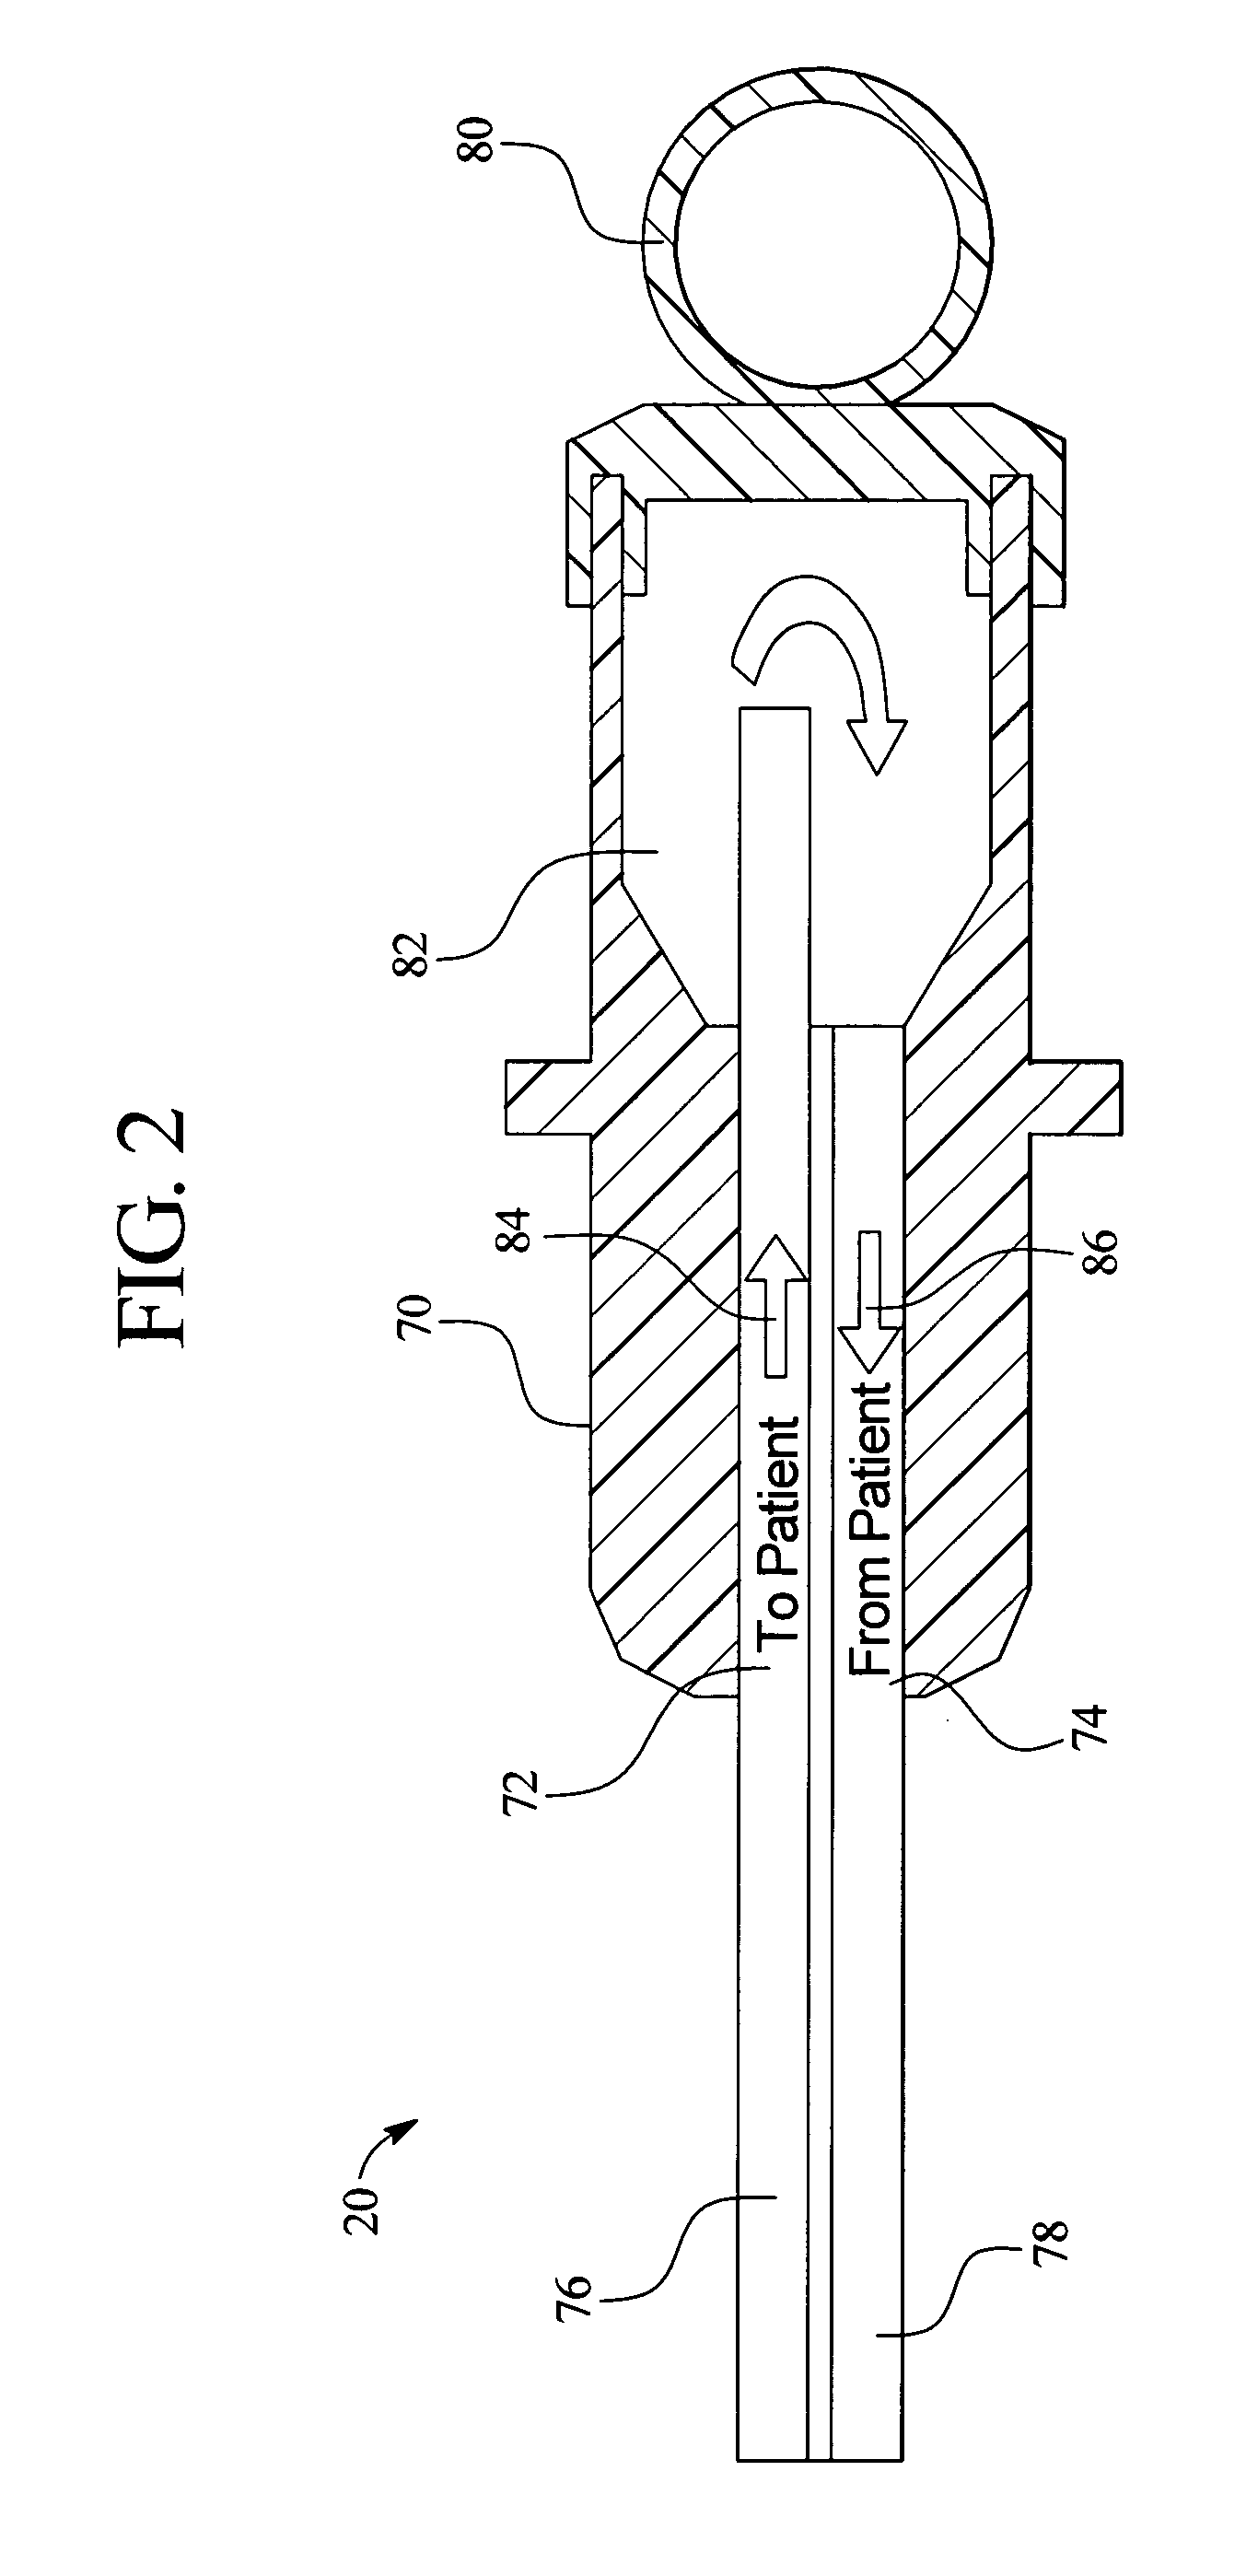 Systems and methods for performing peritoneal dialysis